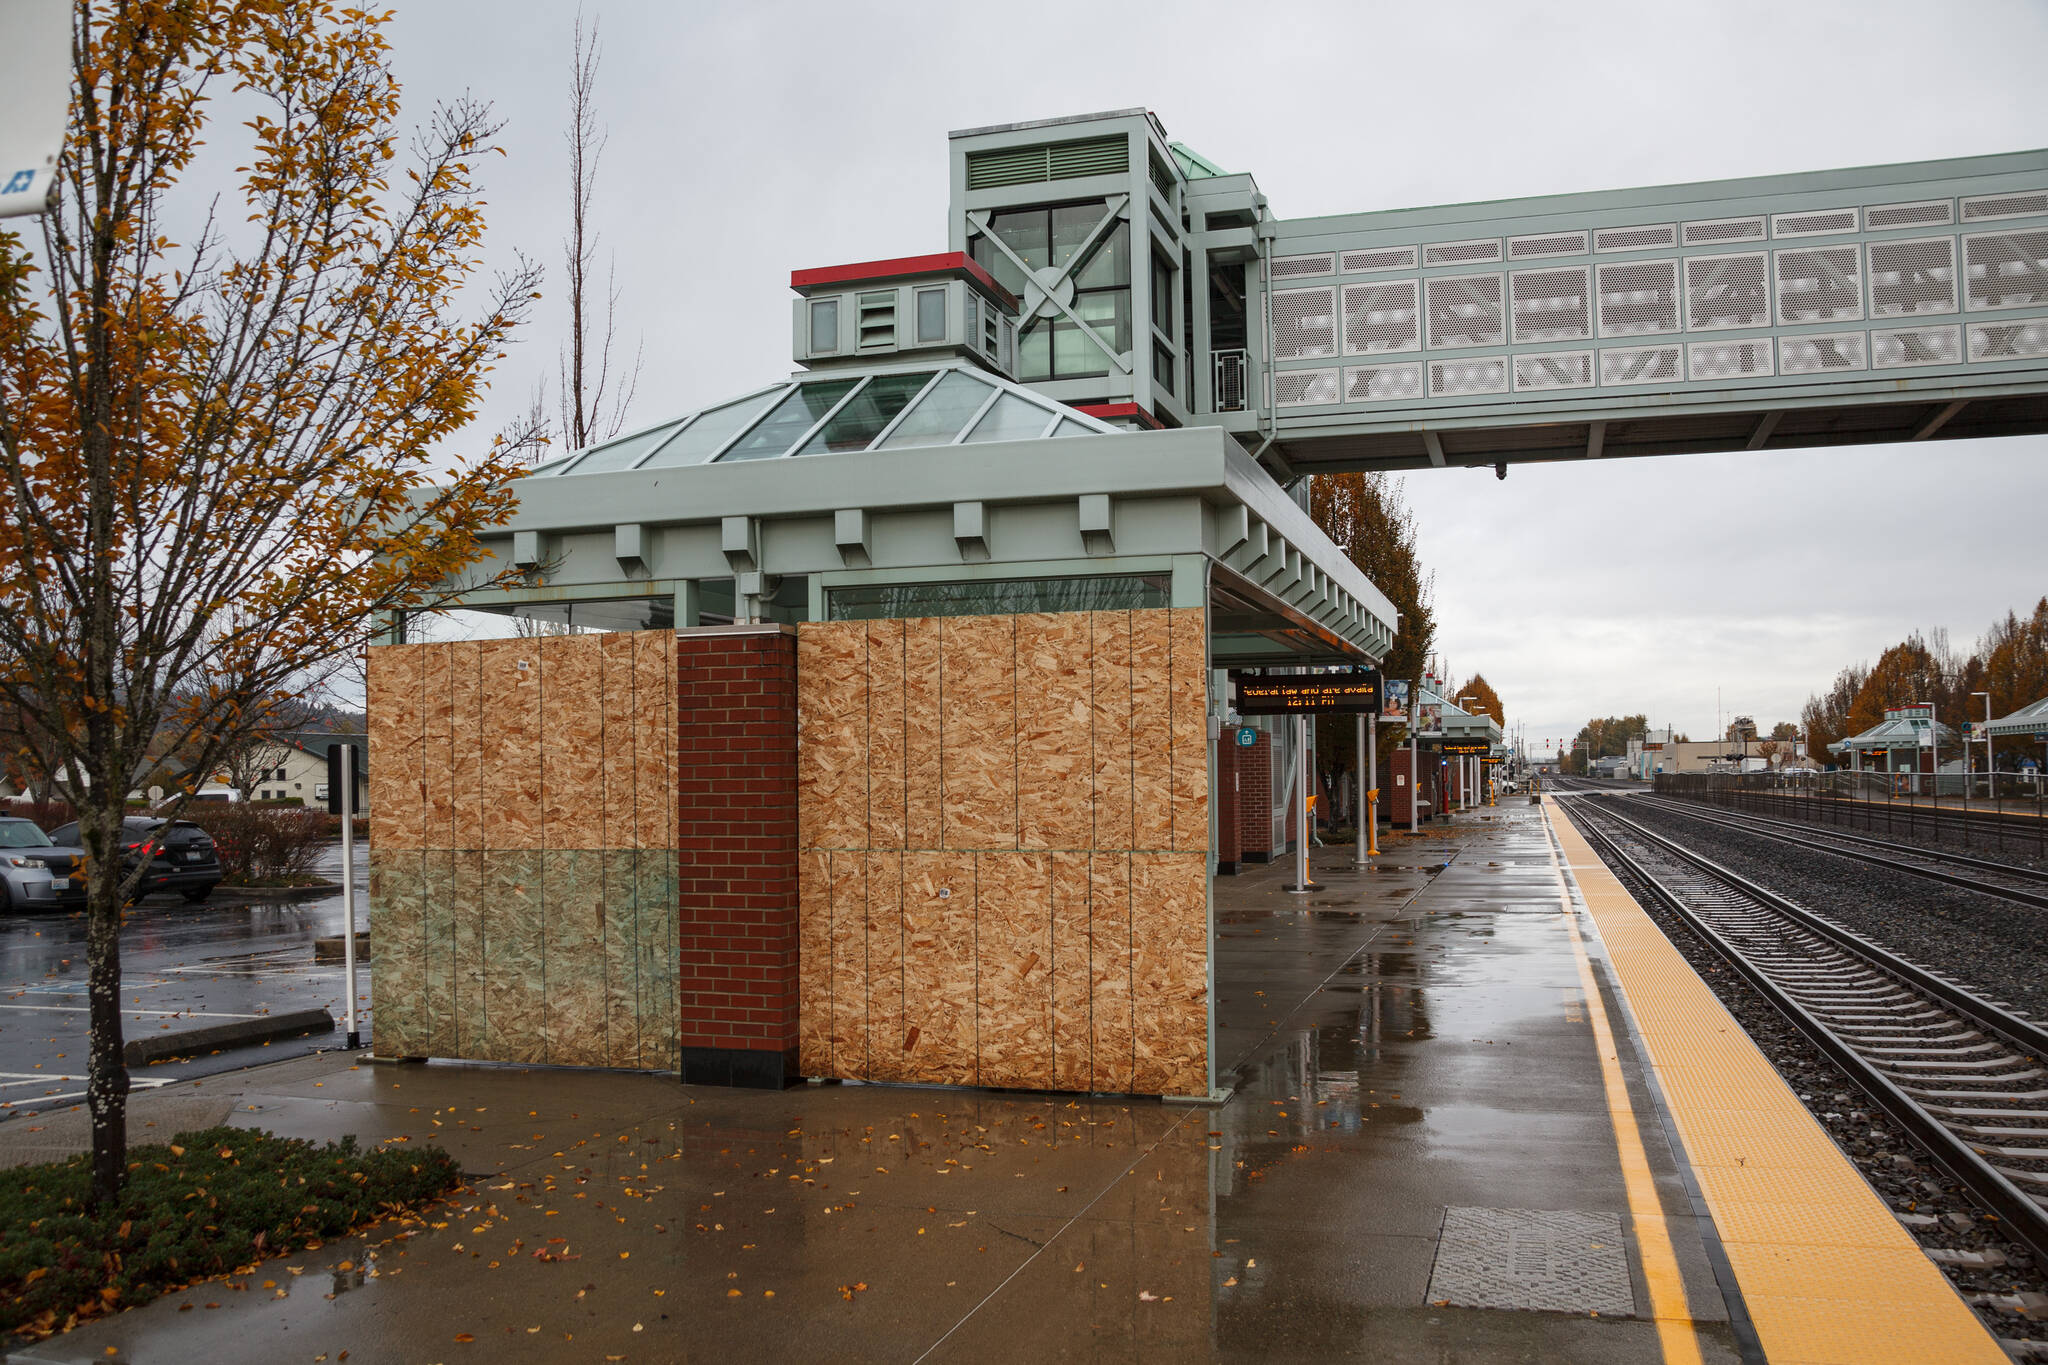 Broken windows boarded up at Sound Transit Auburn Station after a man threw rocks at the windows, shattering them and causing an estimated $20,000 in damage according to charging documents. Photo by Henry Stewart-Wood/Auburn Reporter